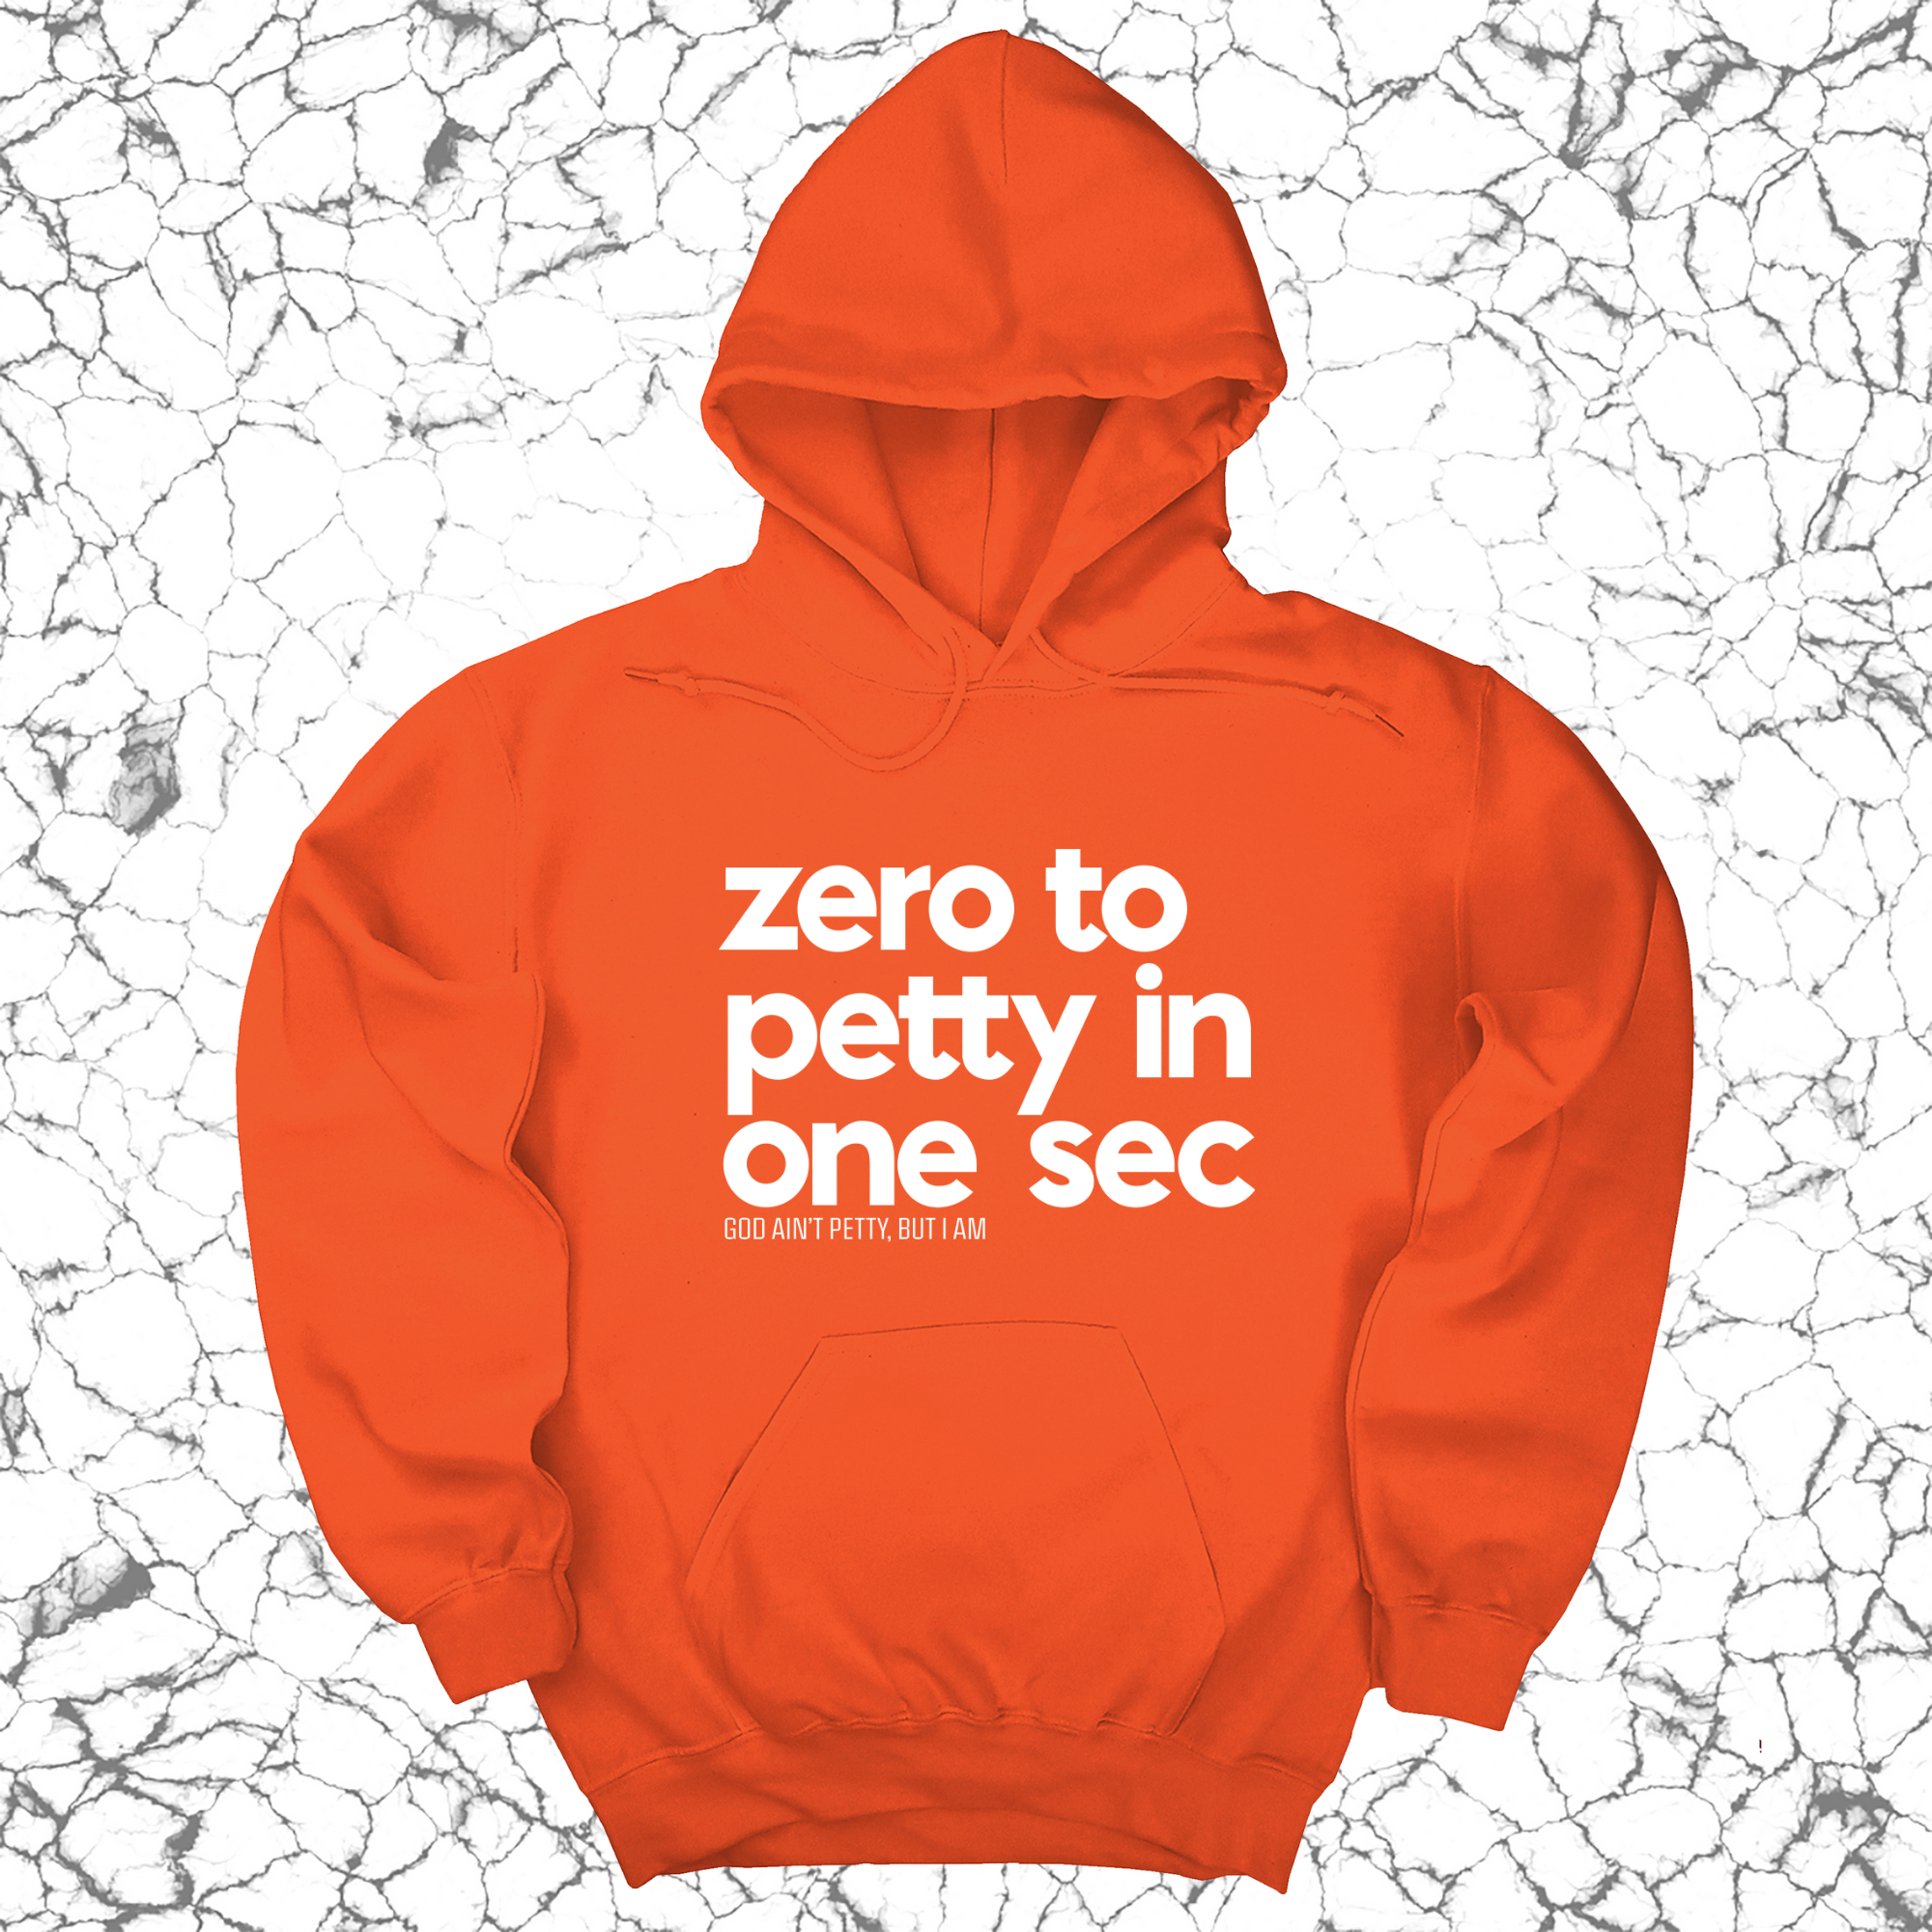 Zero to petty in one sec Unisex Hoodie-Hoodie-The Original God Ain't Petty But I Am